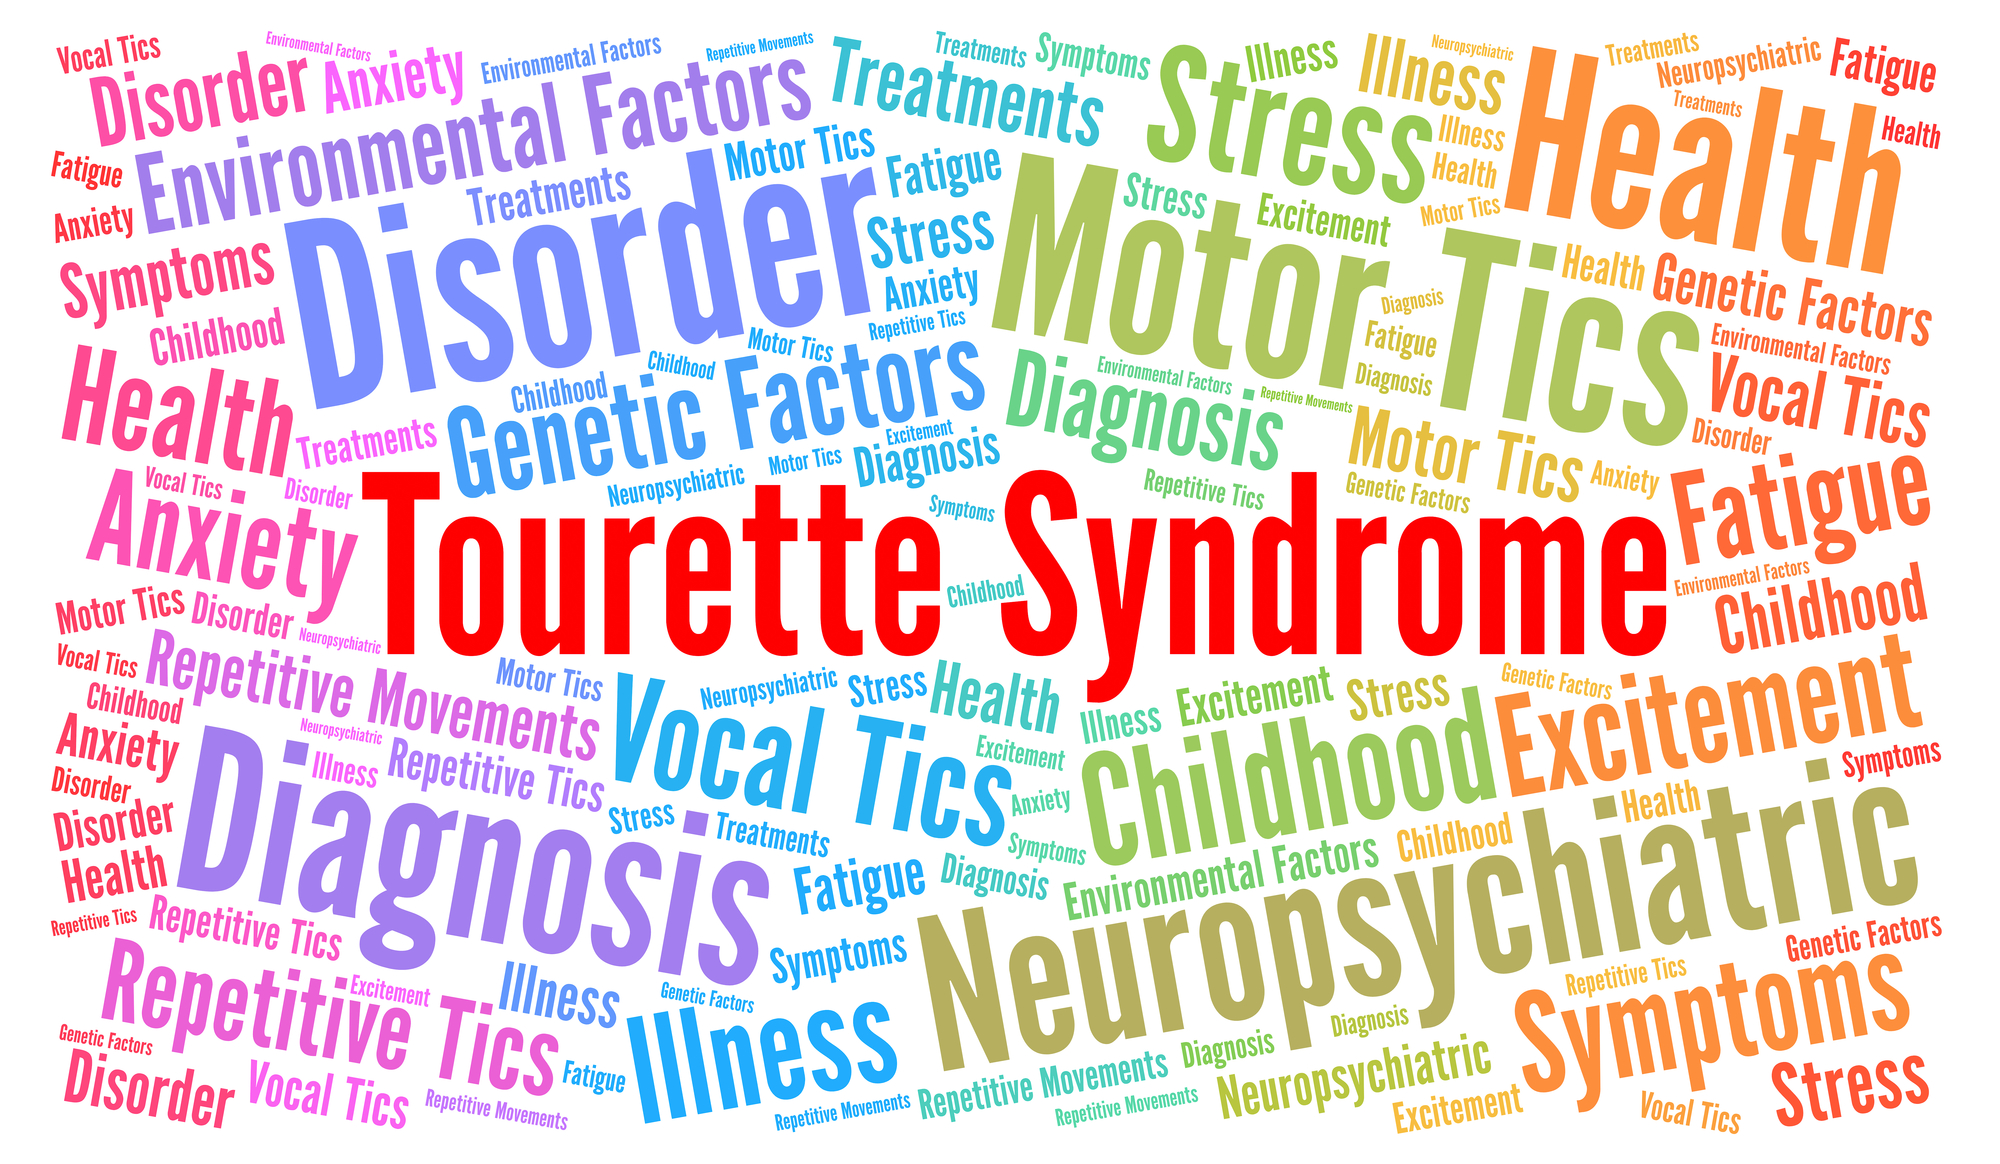 Dietary Interventions for Tics and Tourette Syndrome